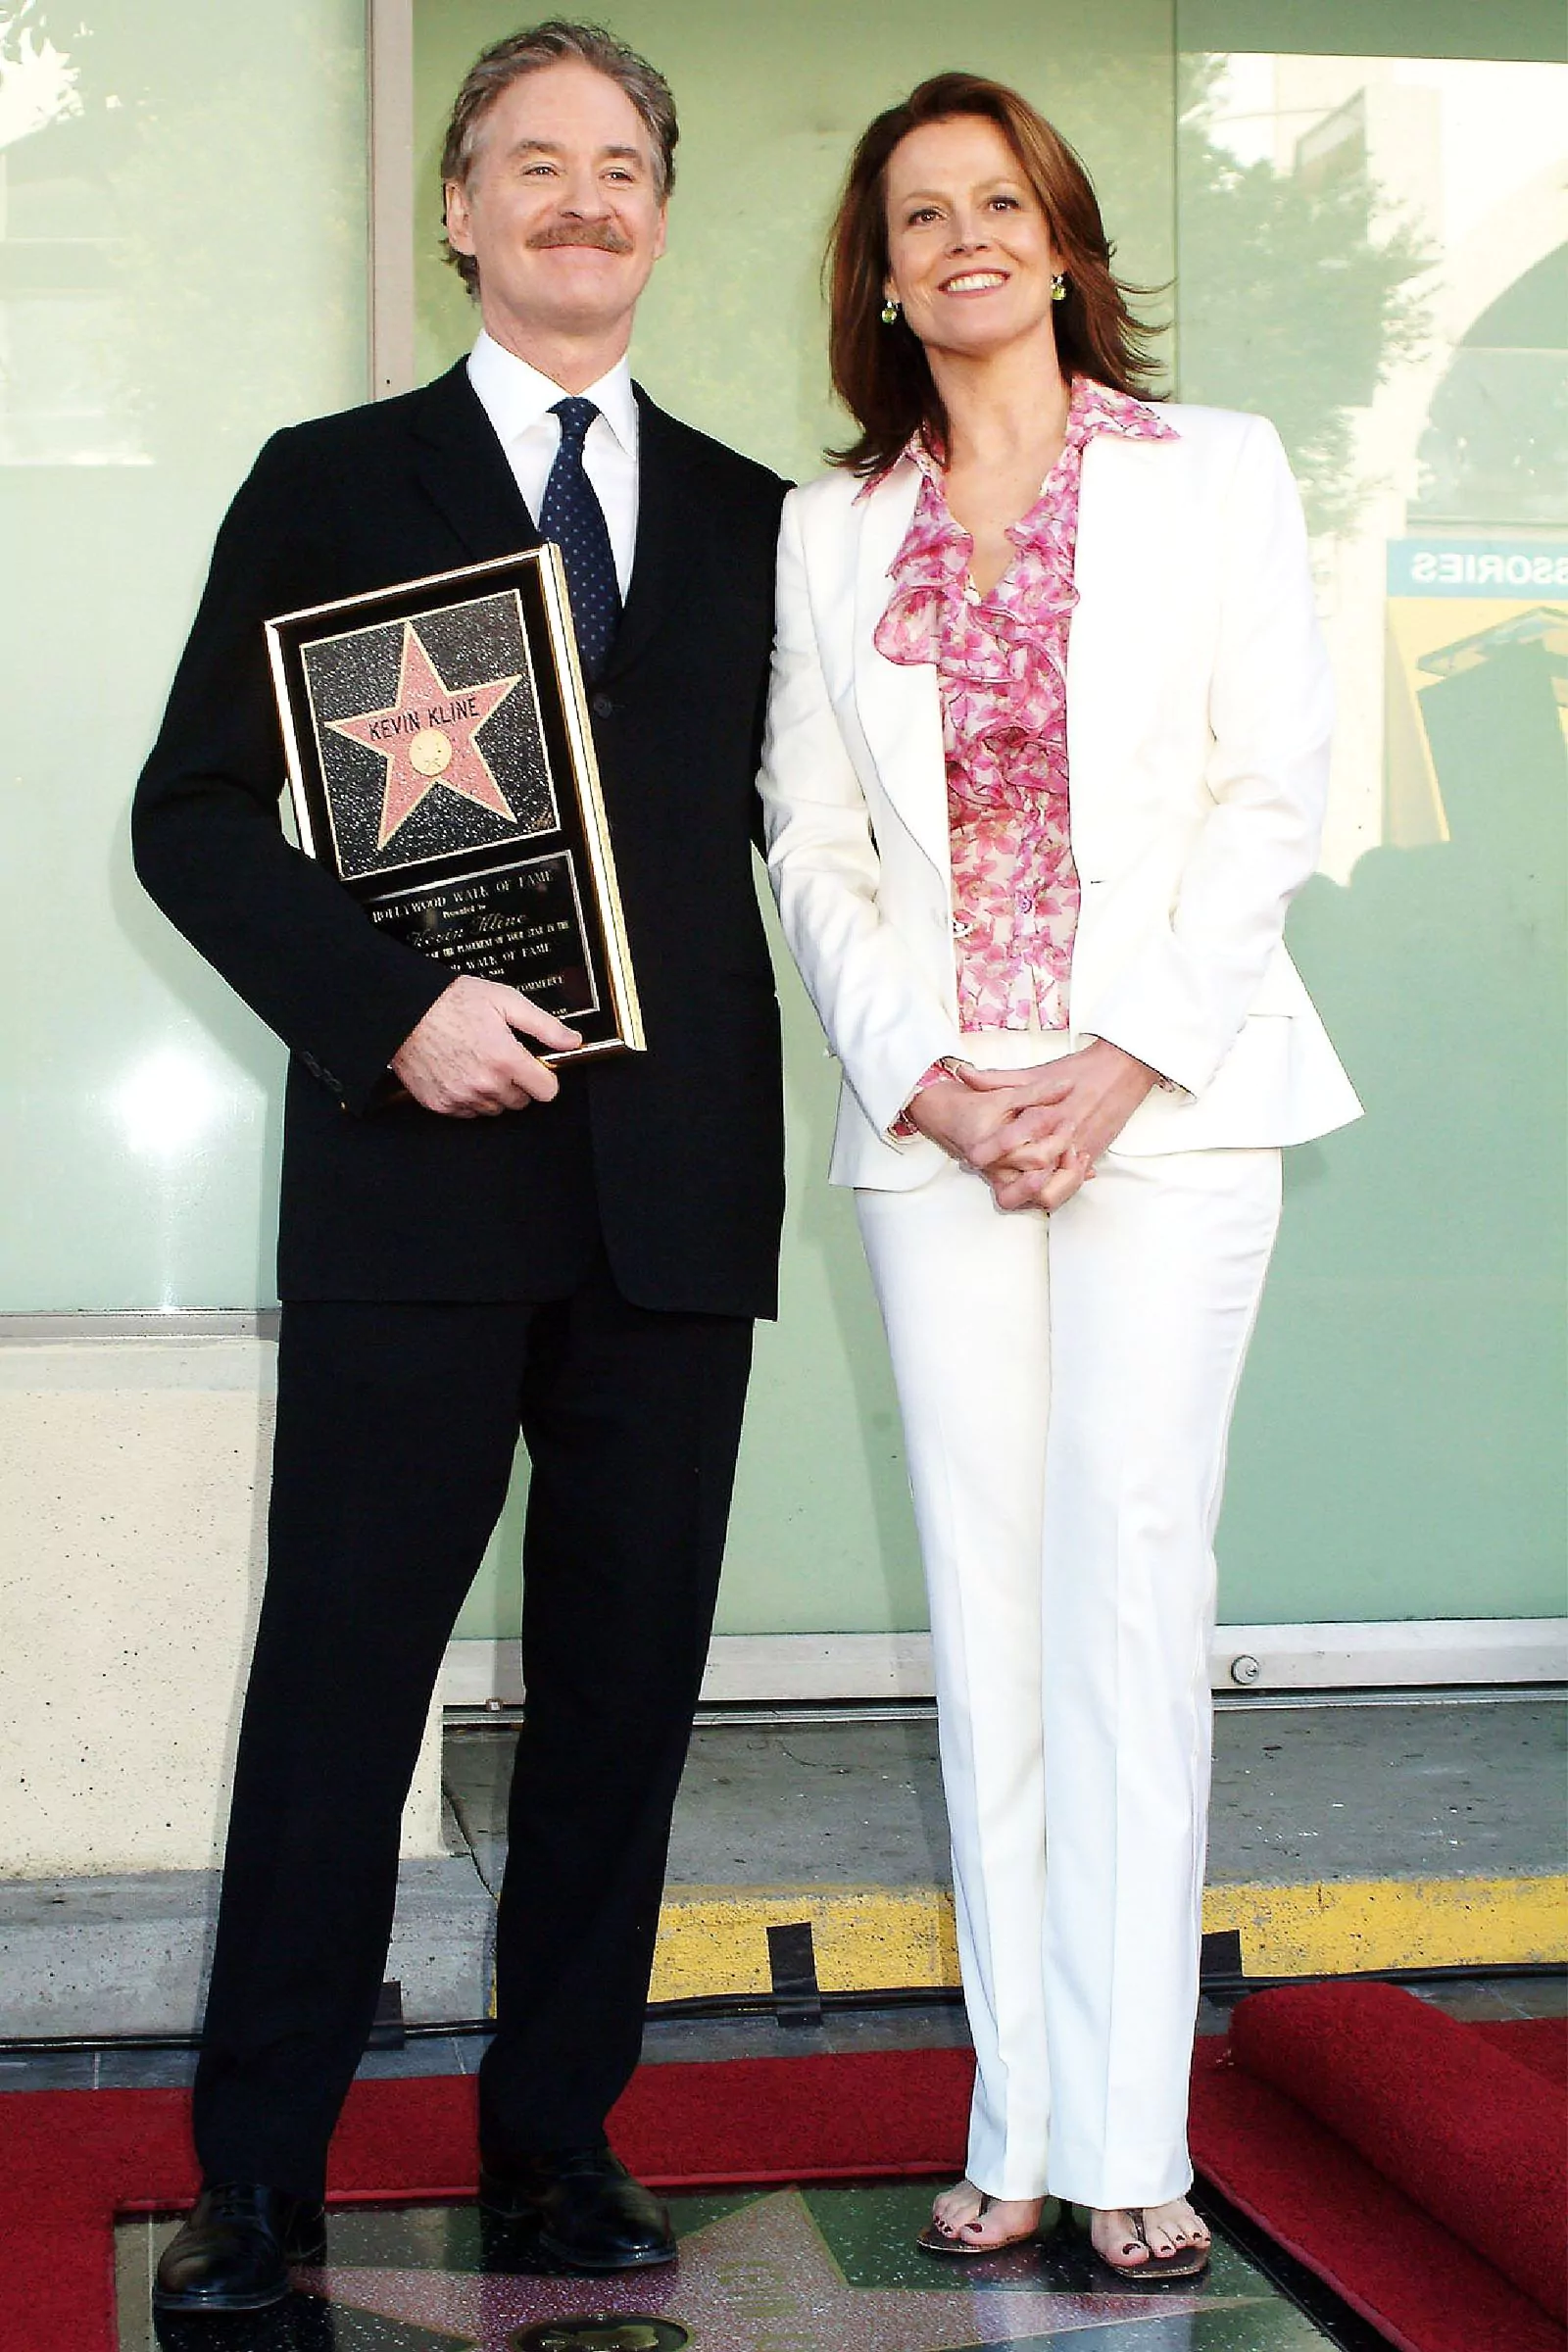 Kevin Kline and Sigourney Weaver at the ceremony to honor actors with a star on the Hollywood Walk of Fame, December 3, 2004.